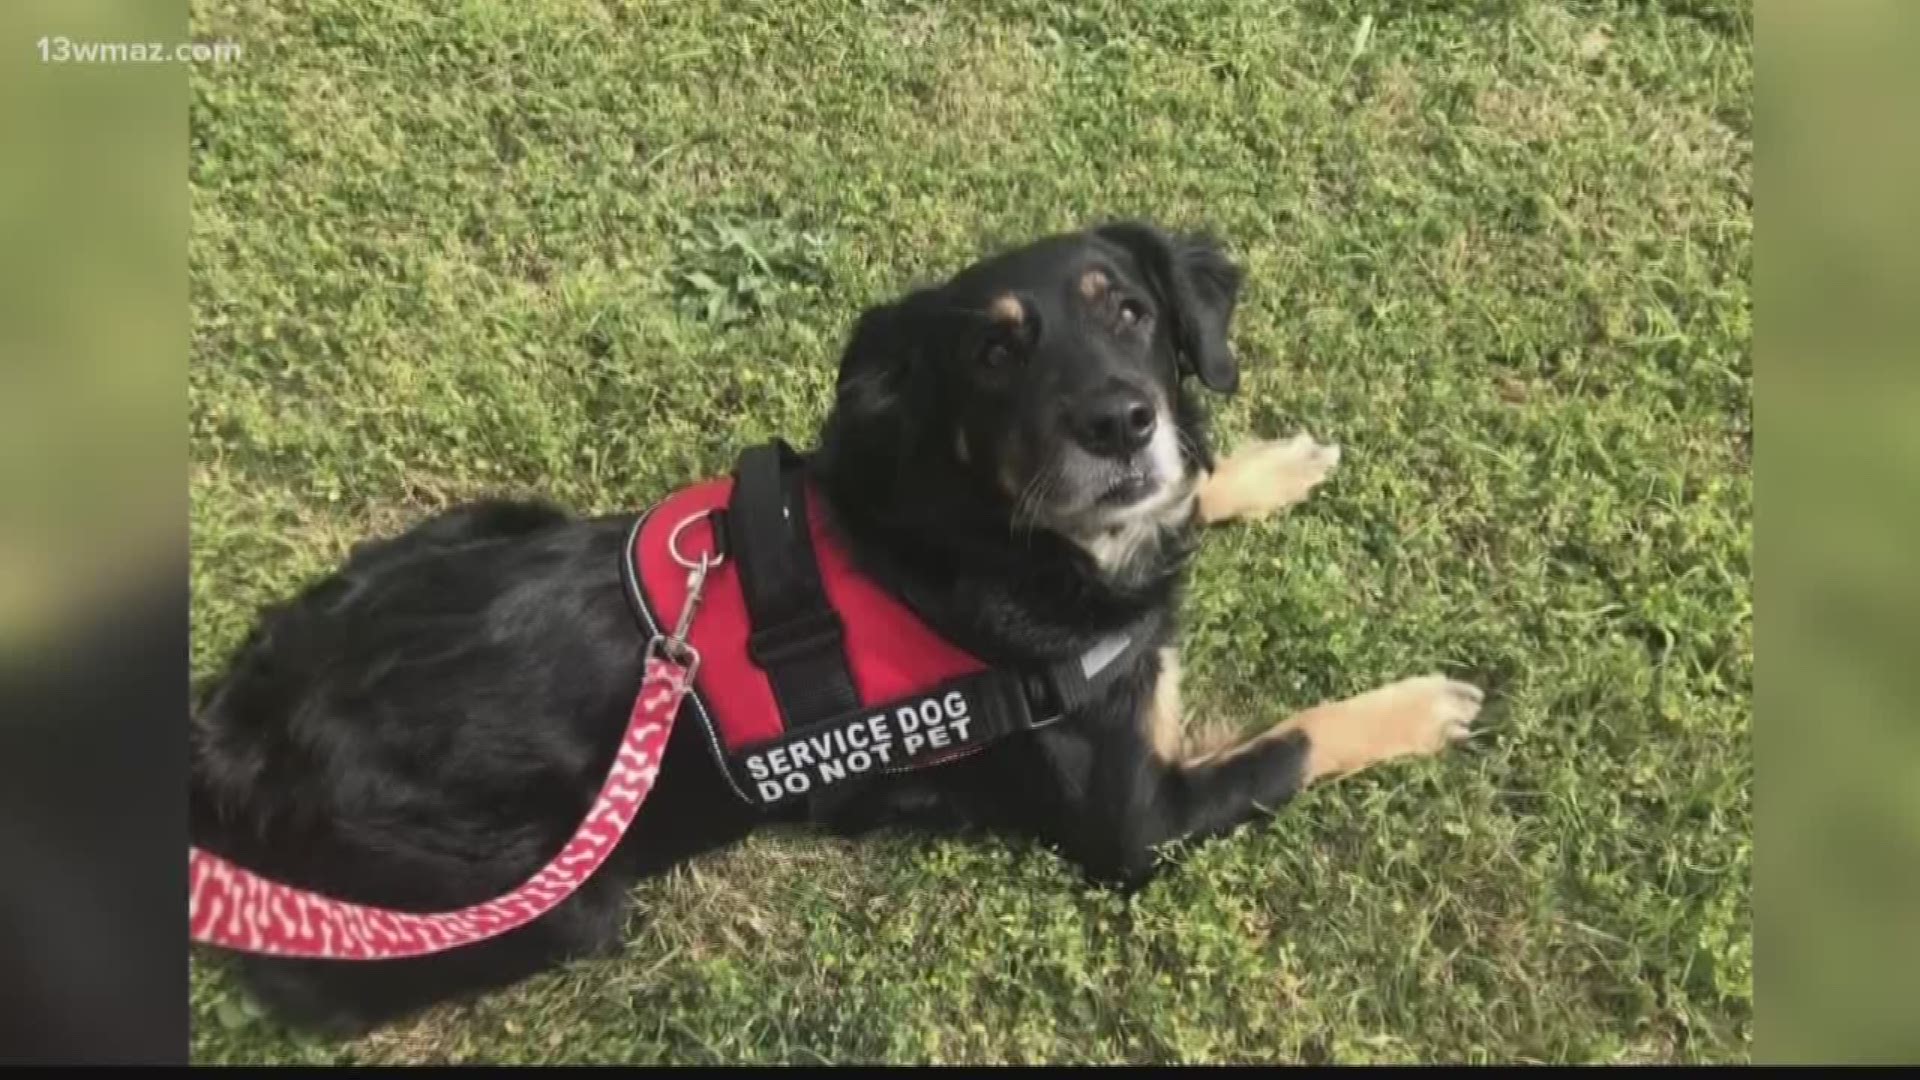 A Warner Robins woman is disappointed after she says some store employees asked her to leave because her service dog didn't have a marked vest.